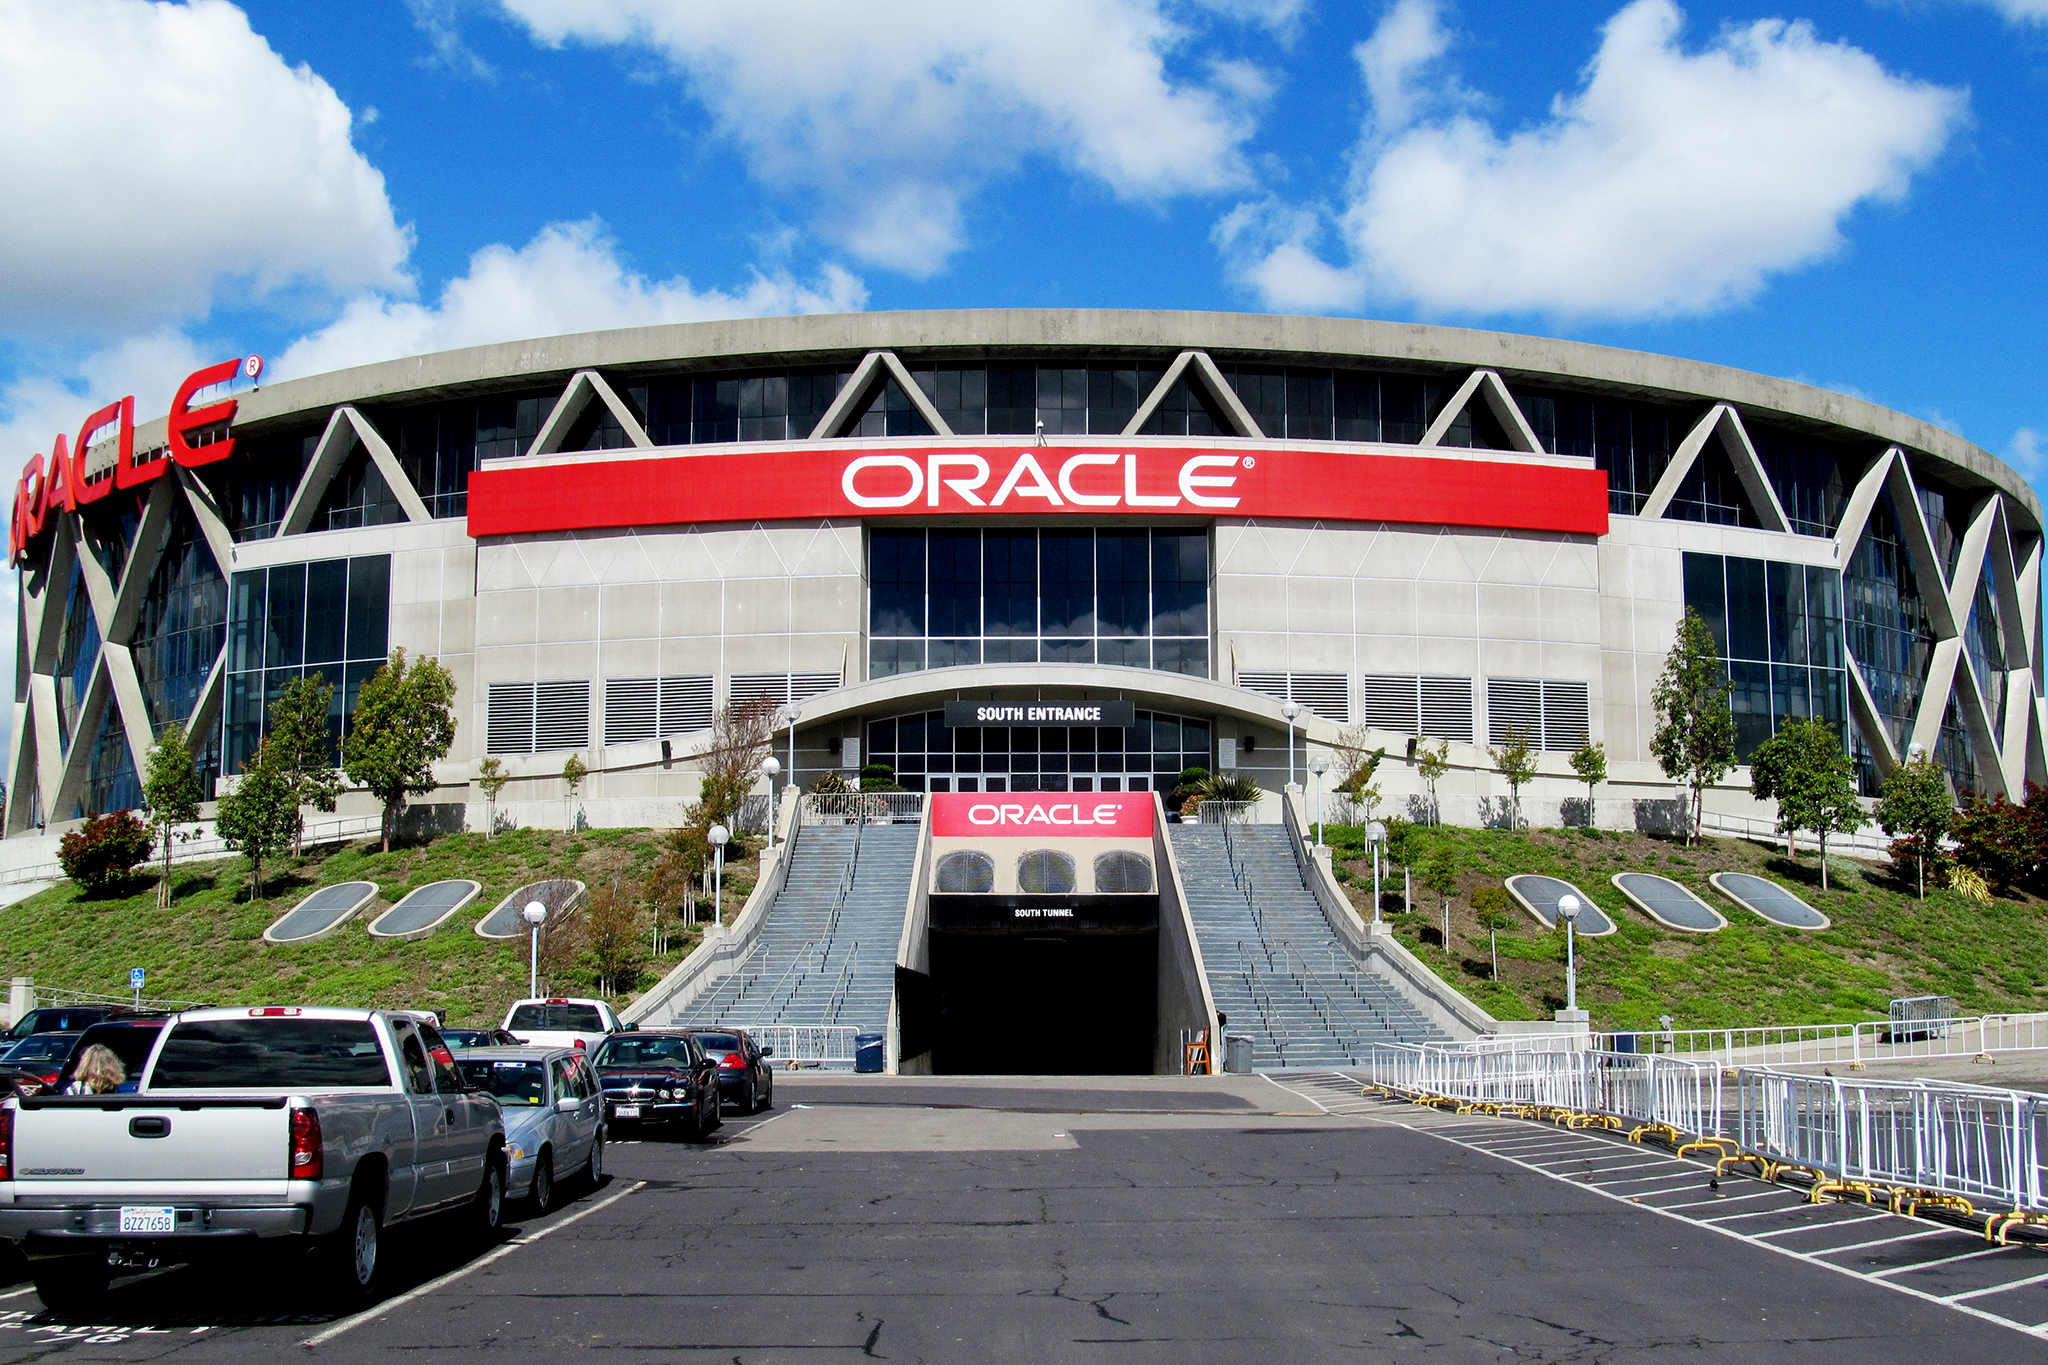 The Best 10 Oracle Arena